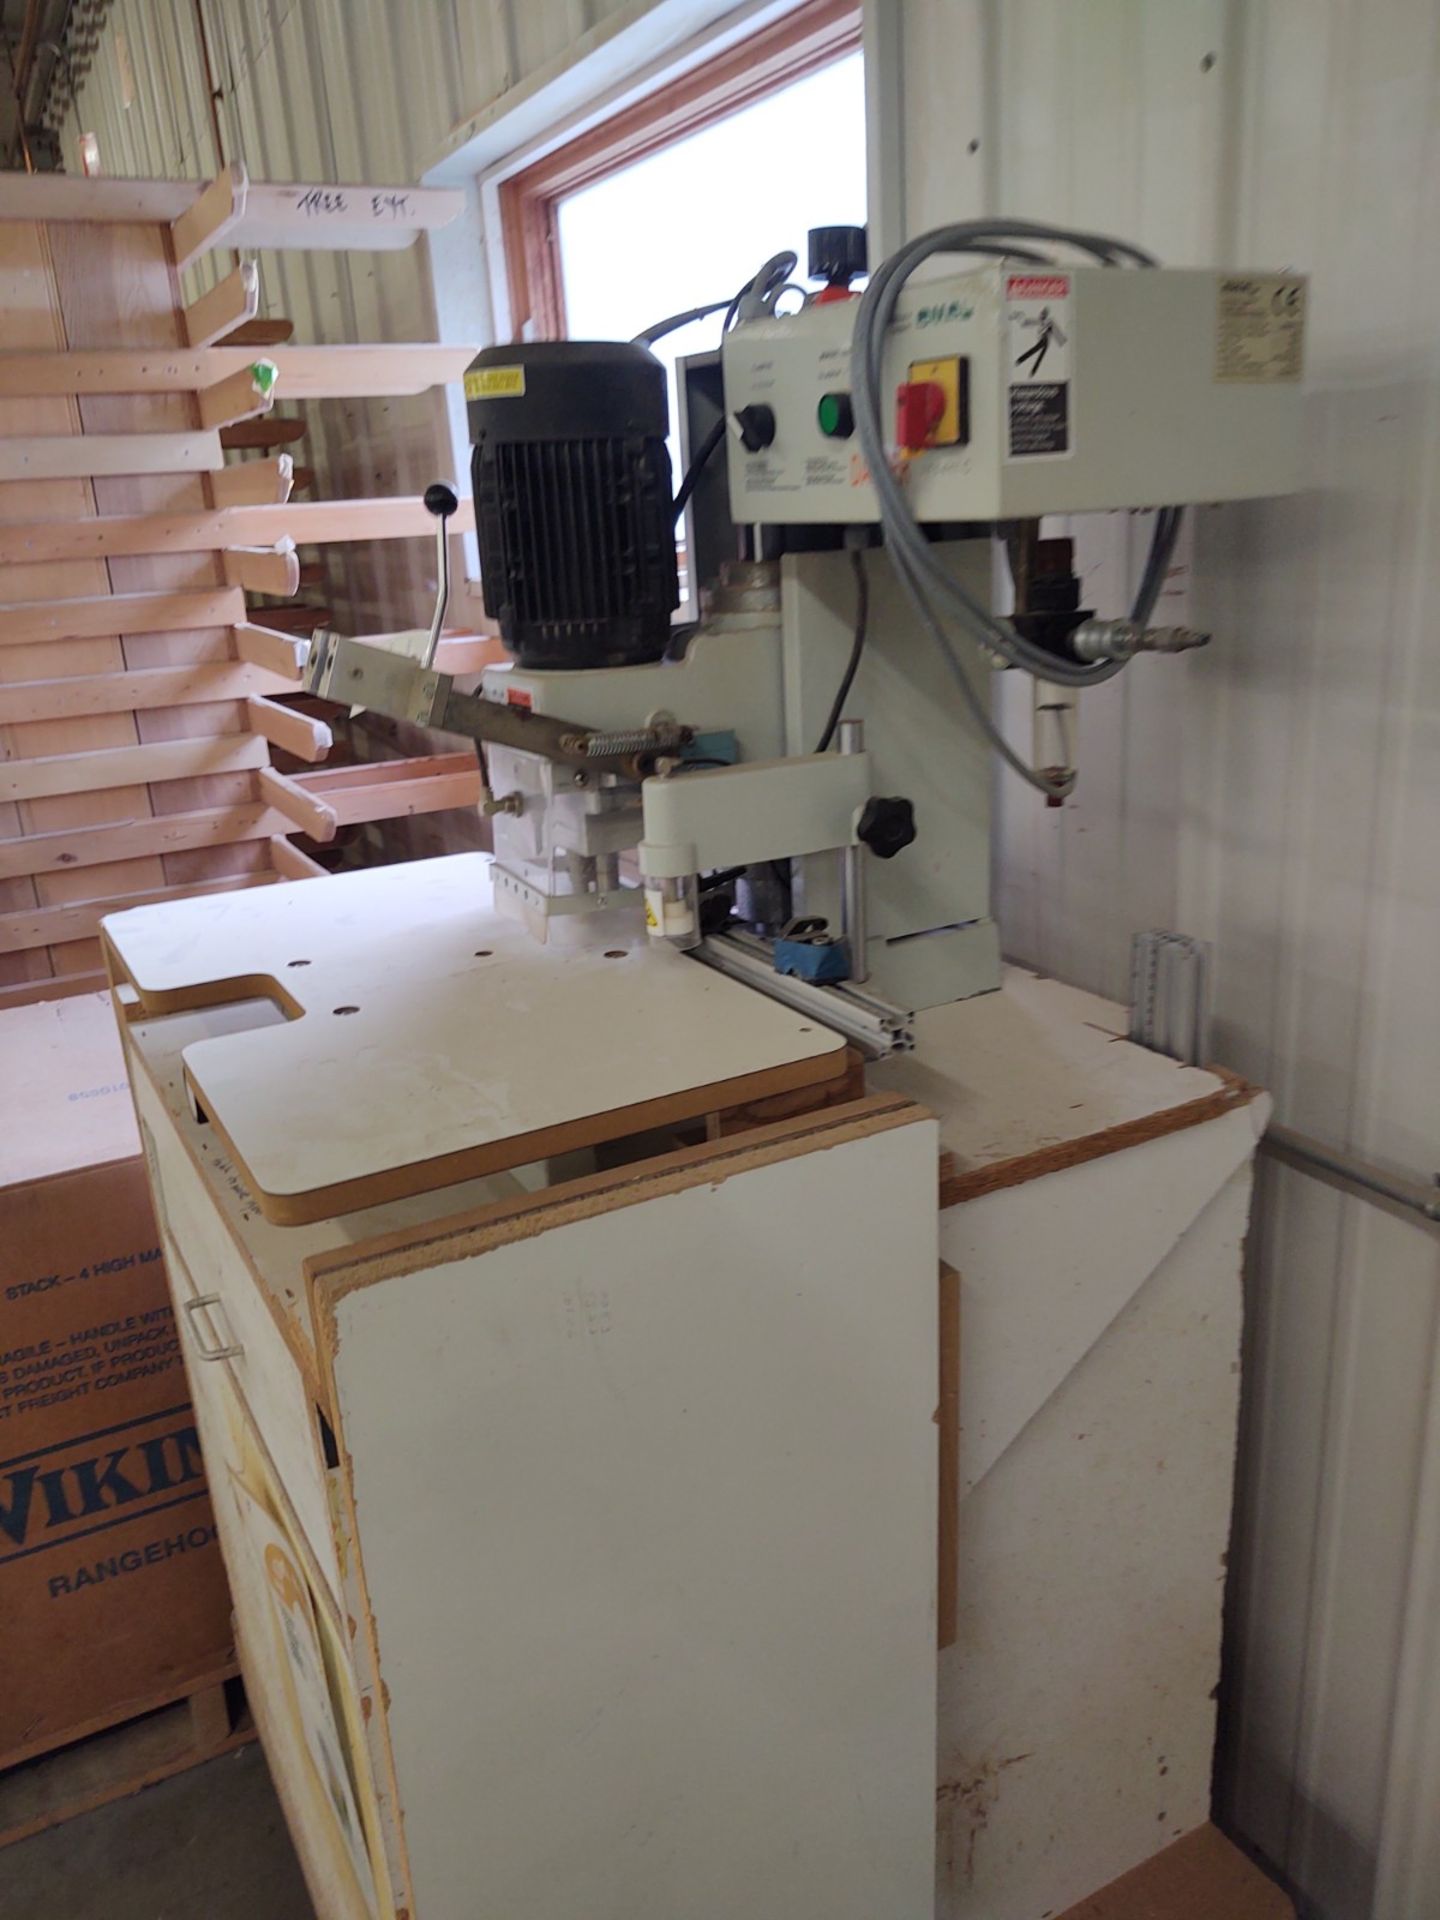 Omal #InsertC Electro Pneumatic Milling and Inserting Machine for Hinge Attachments w/ Portable